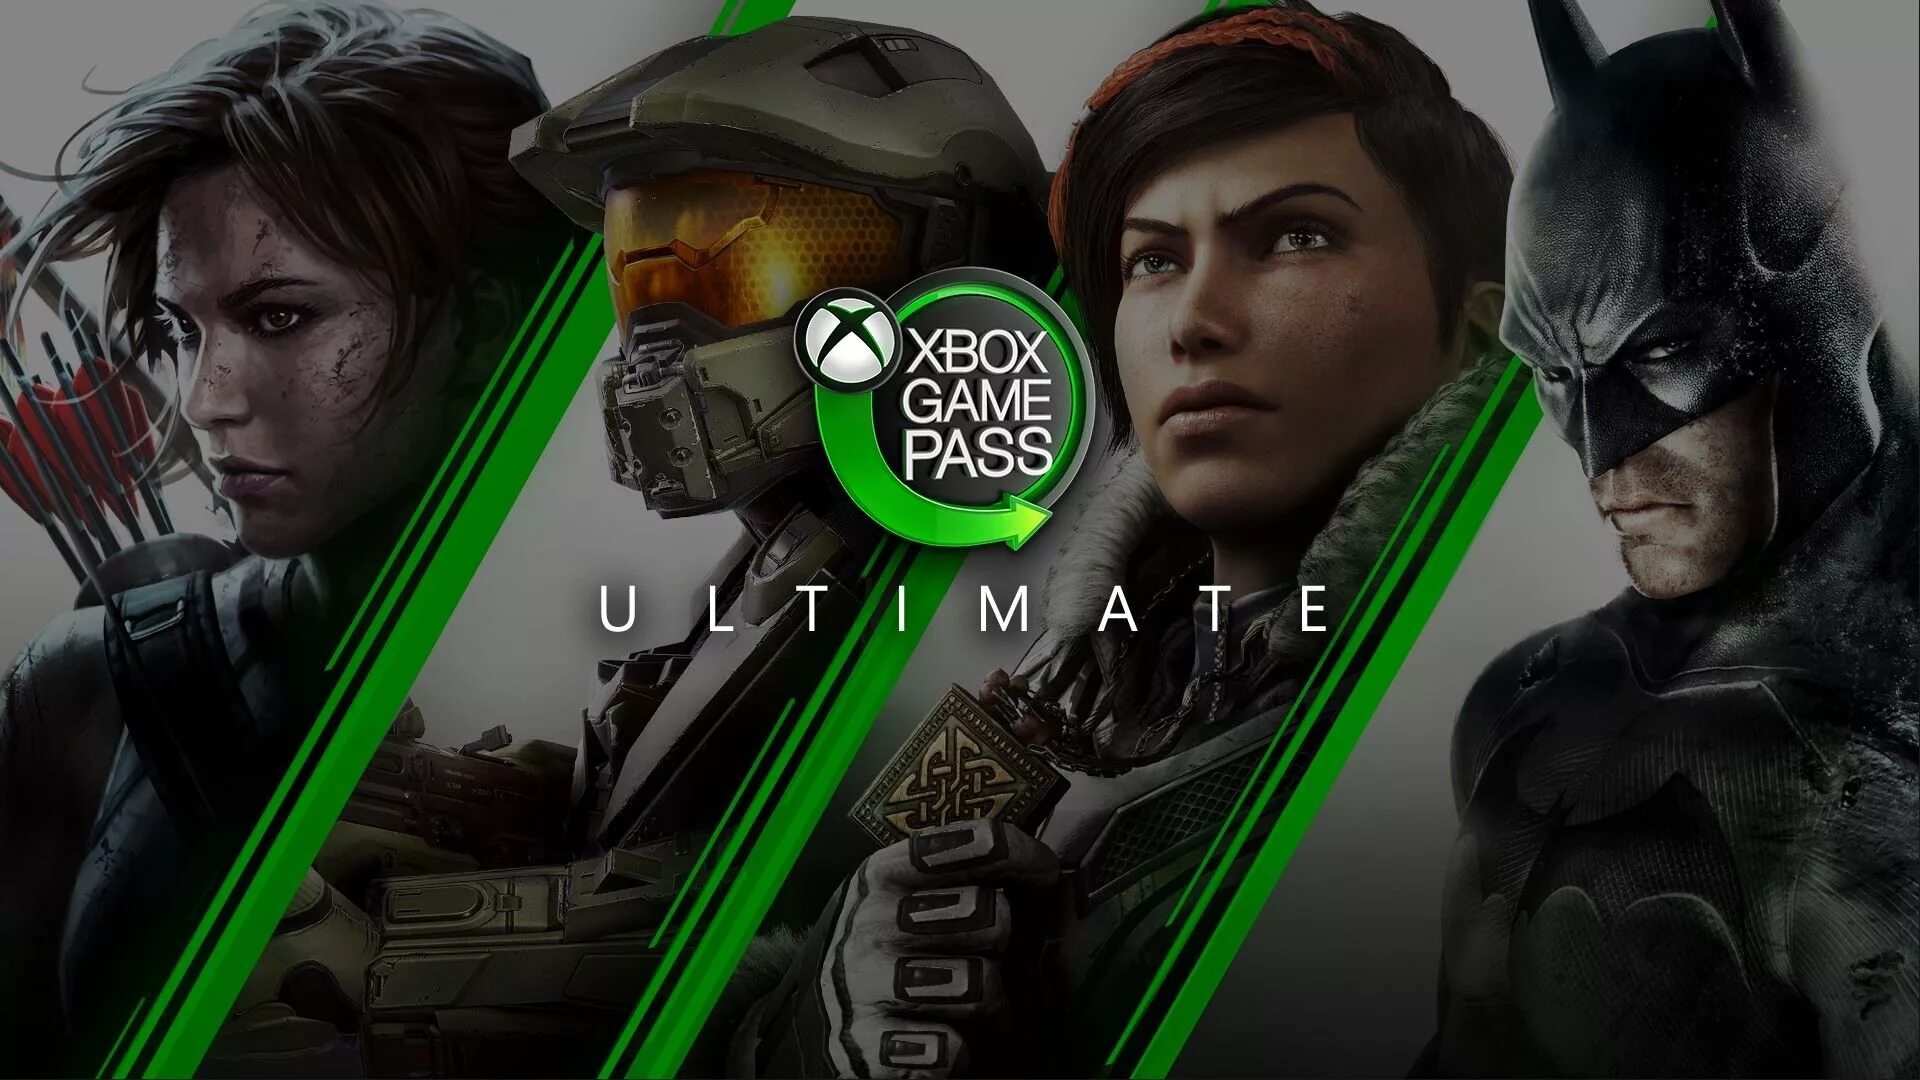 Xbox game pass apk. Xbox game Pass Ultimate. Xbox game Pass Ultimate 1 month. Xbox Ultimate Pass игры. Xbox Ultimate Pass 12.